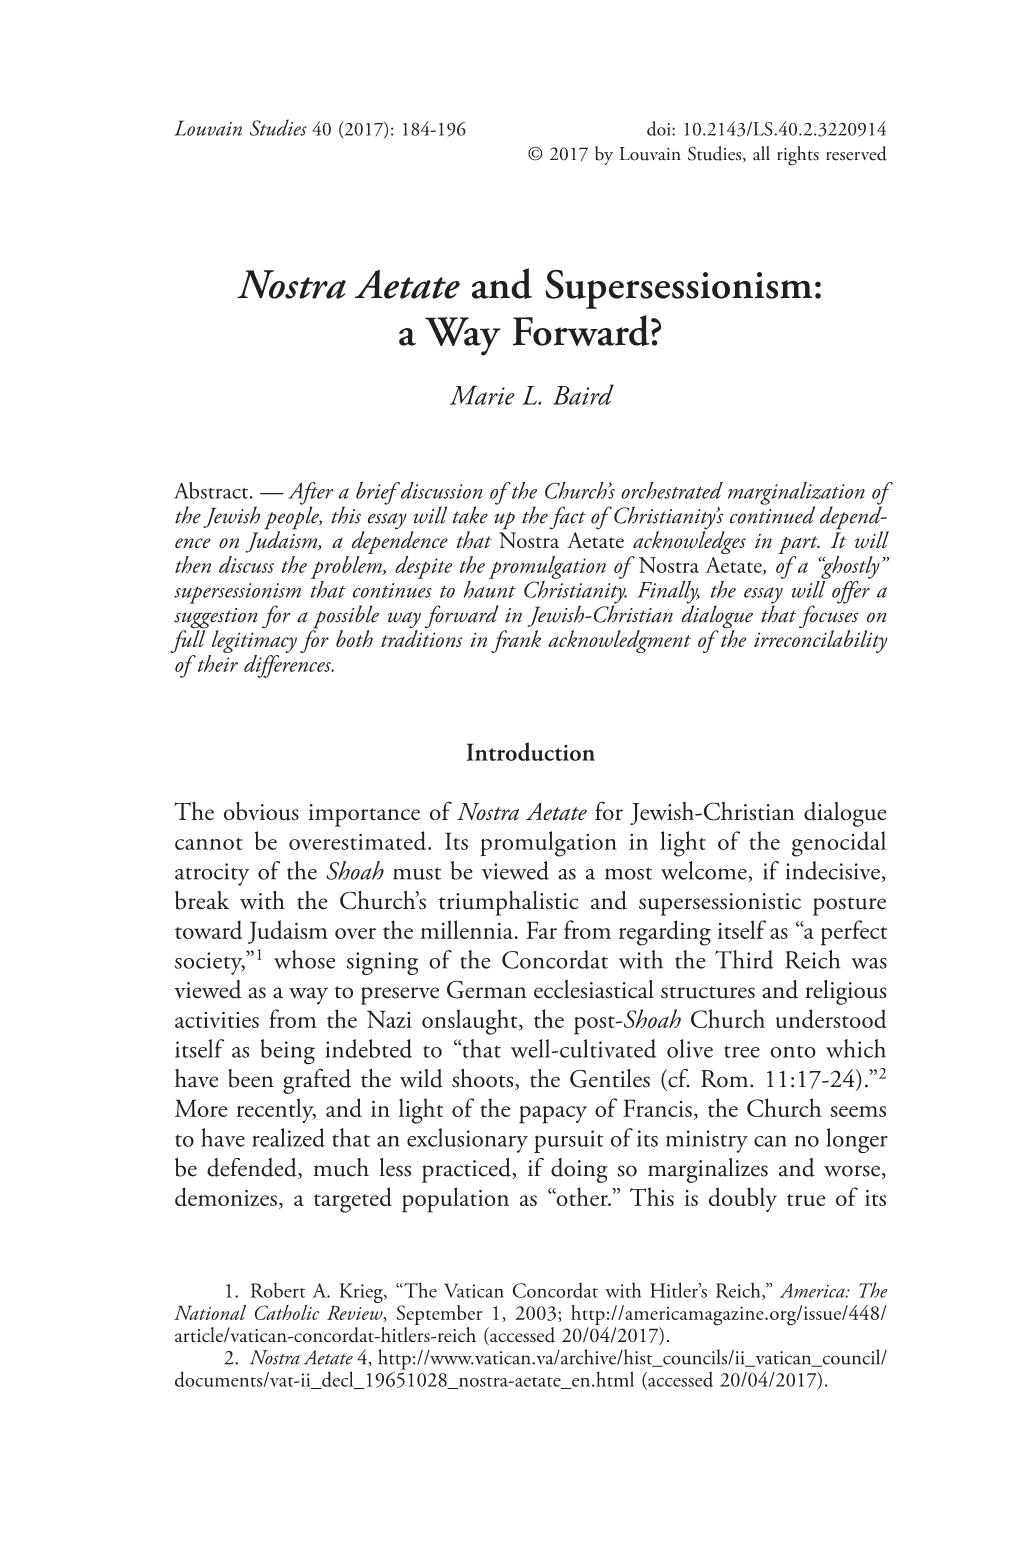 Nostra Aetate and Supersessionism: a Way Forward?